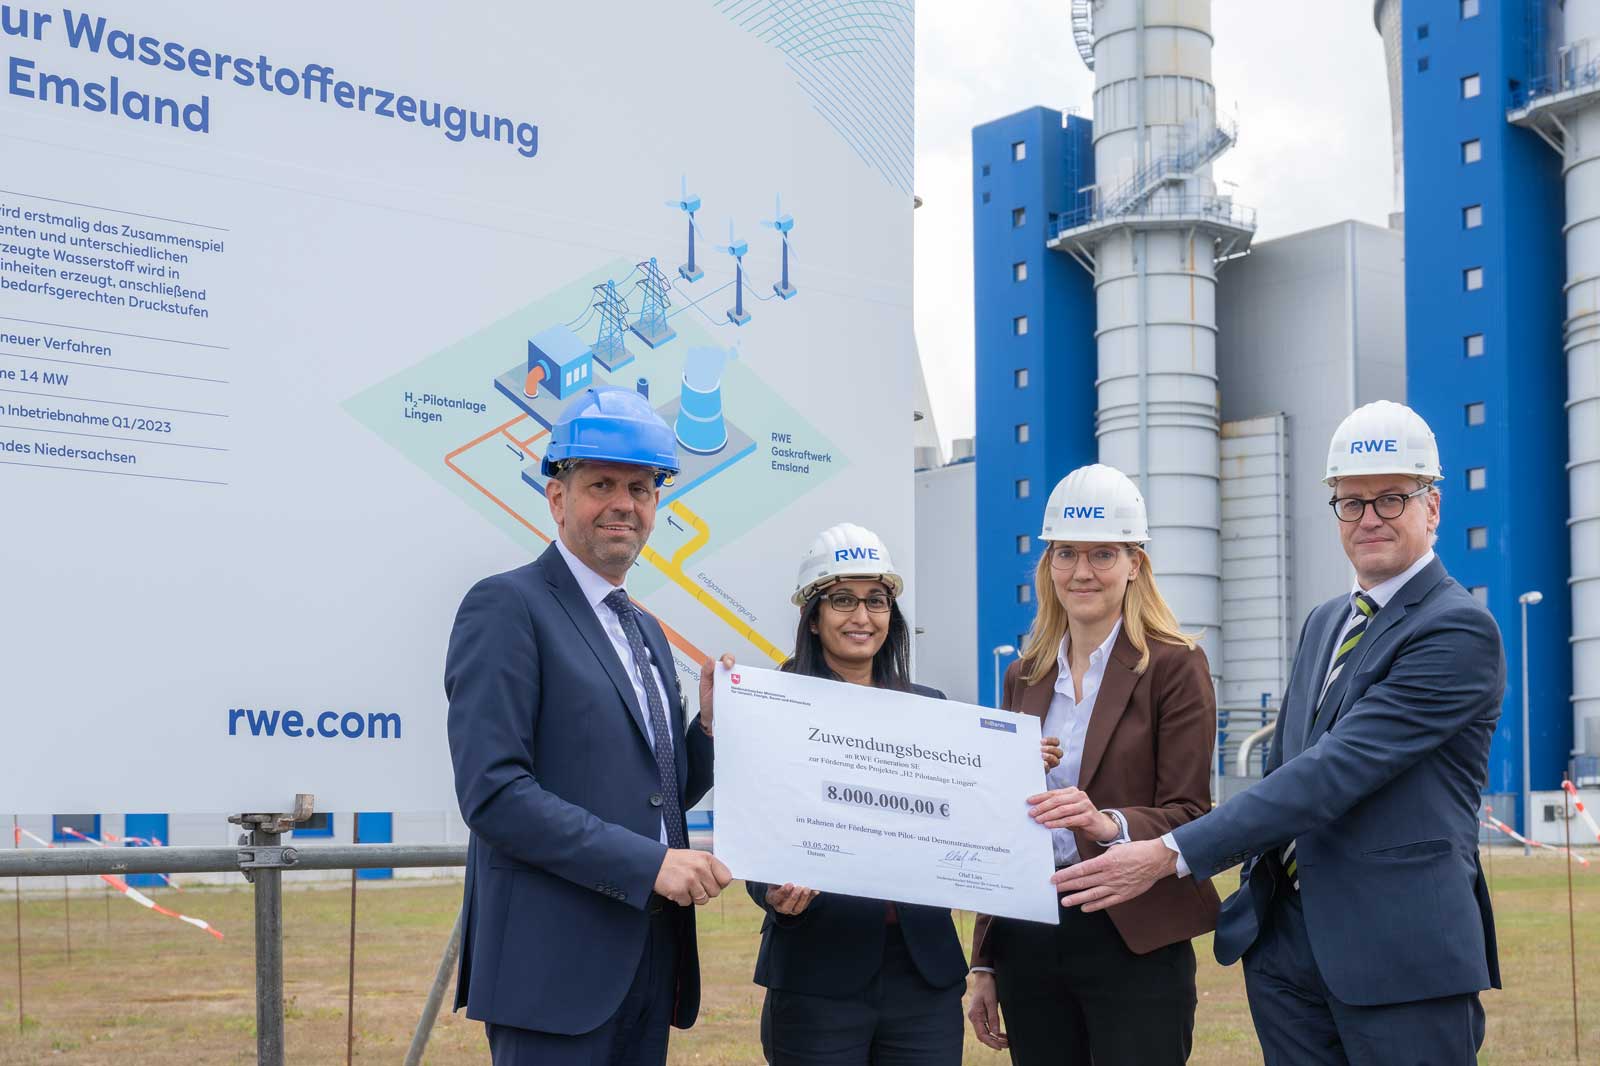 Funding decision for the 14 MW pilot electrolysis plant in Lingen